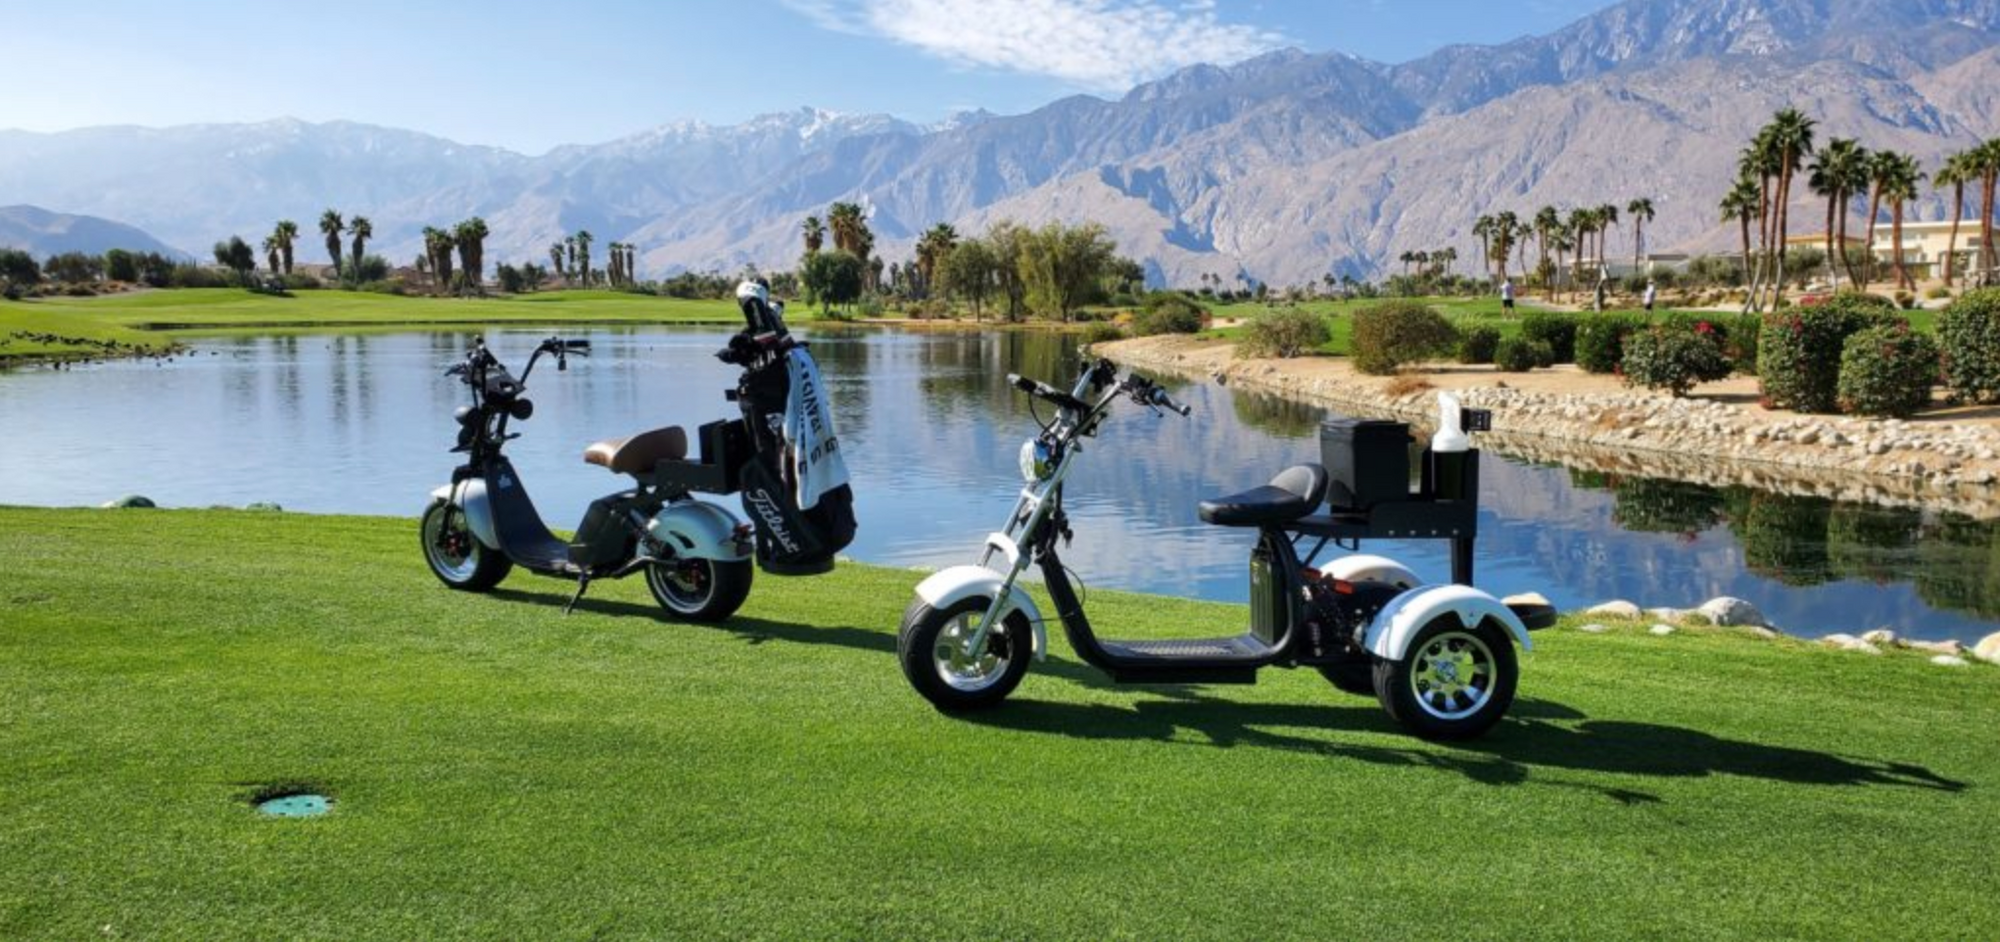 Cruise the Fairways in Style: Why Golf Scooters Are the Next Big Thing in High-Performance Golfing